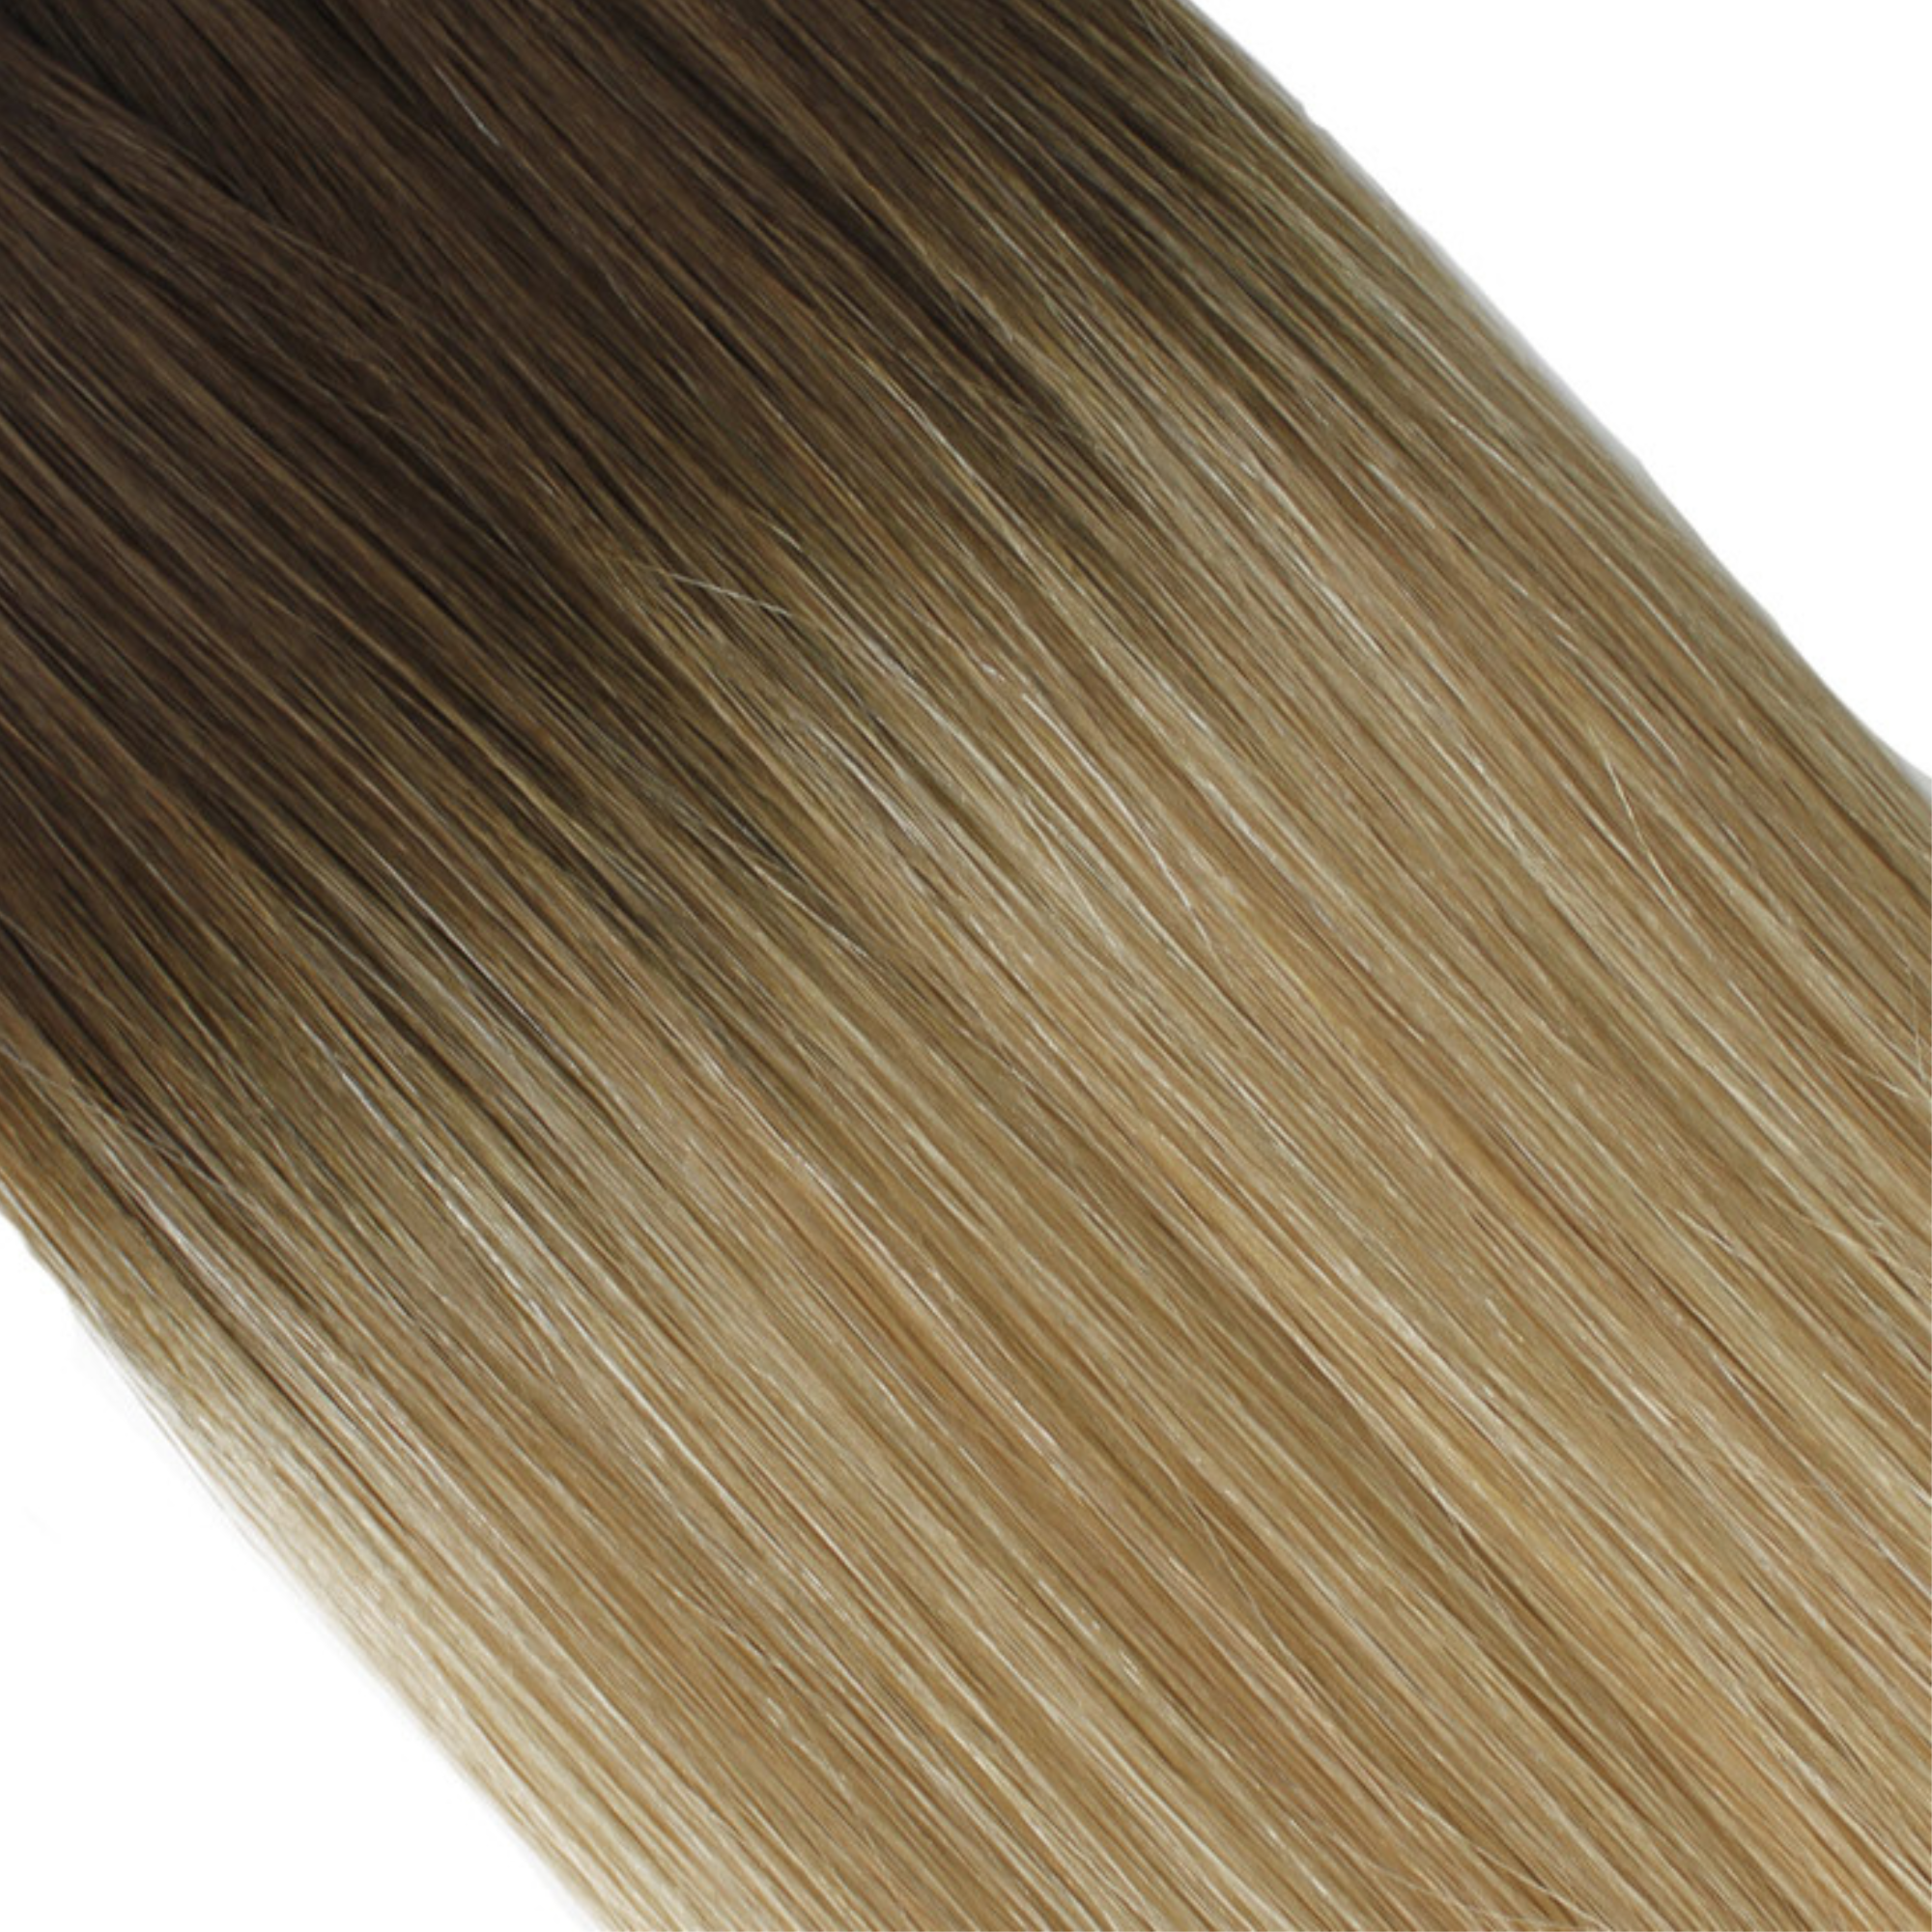 "hair rehab london 22" tape hair extensions shade swatch titled rooted coachella"